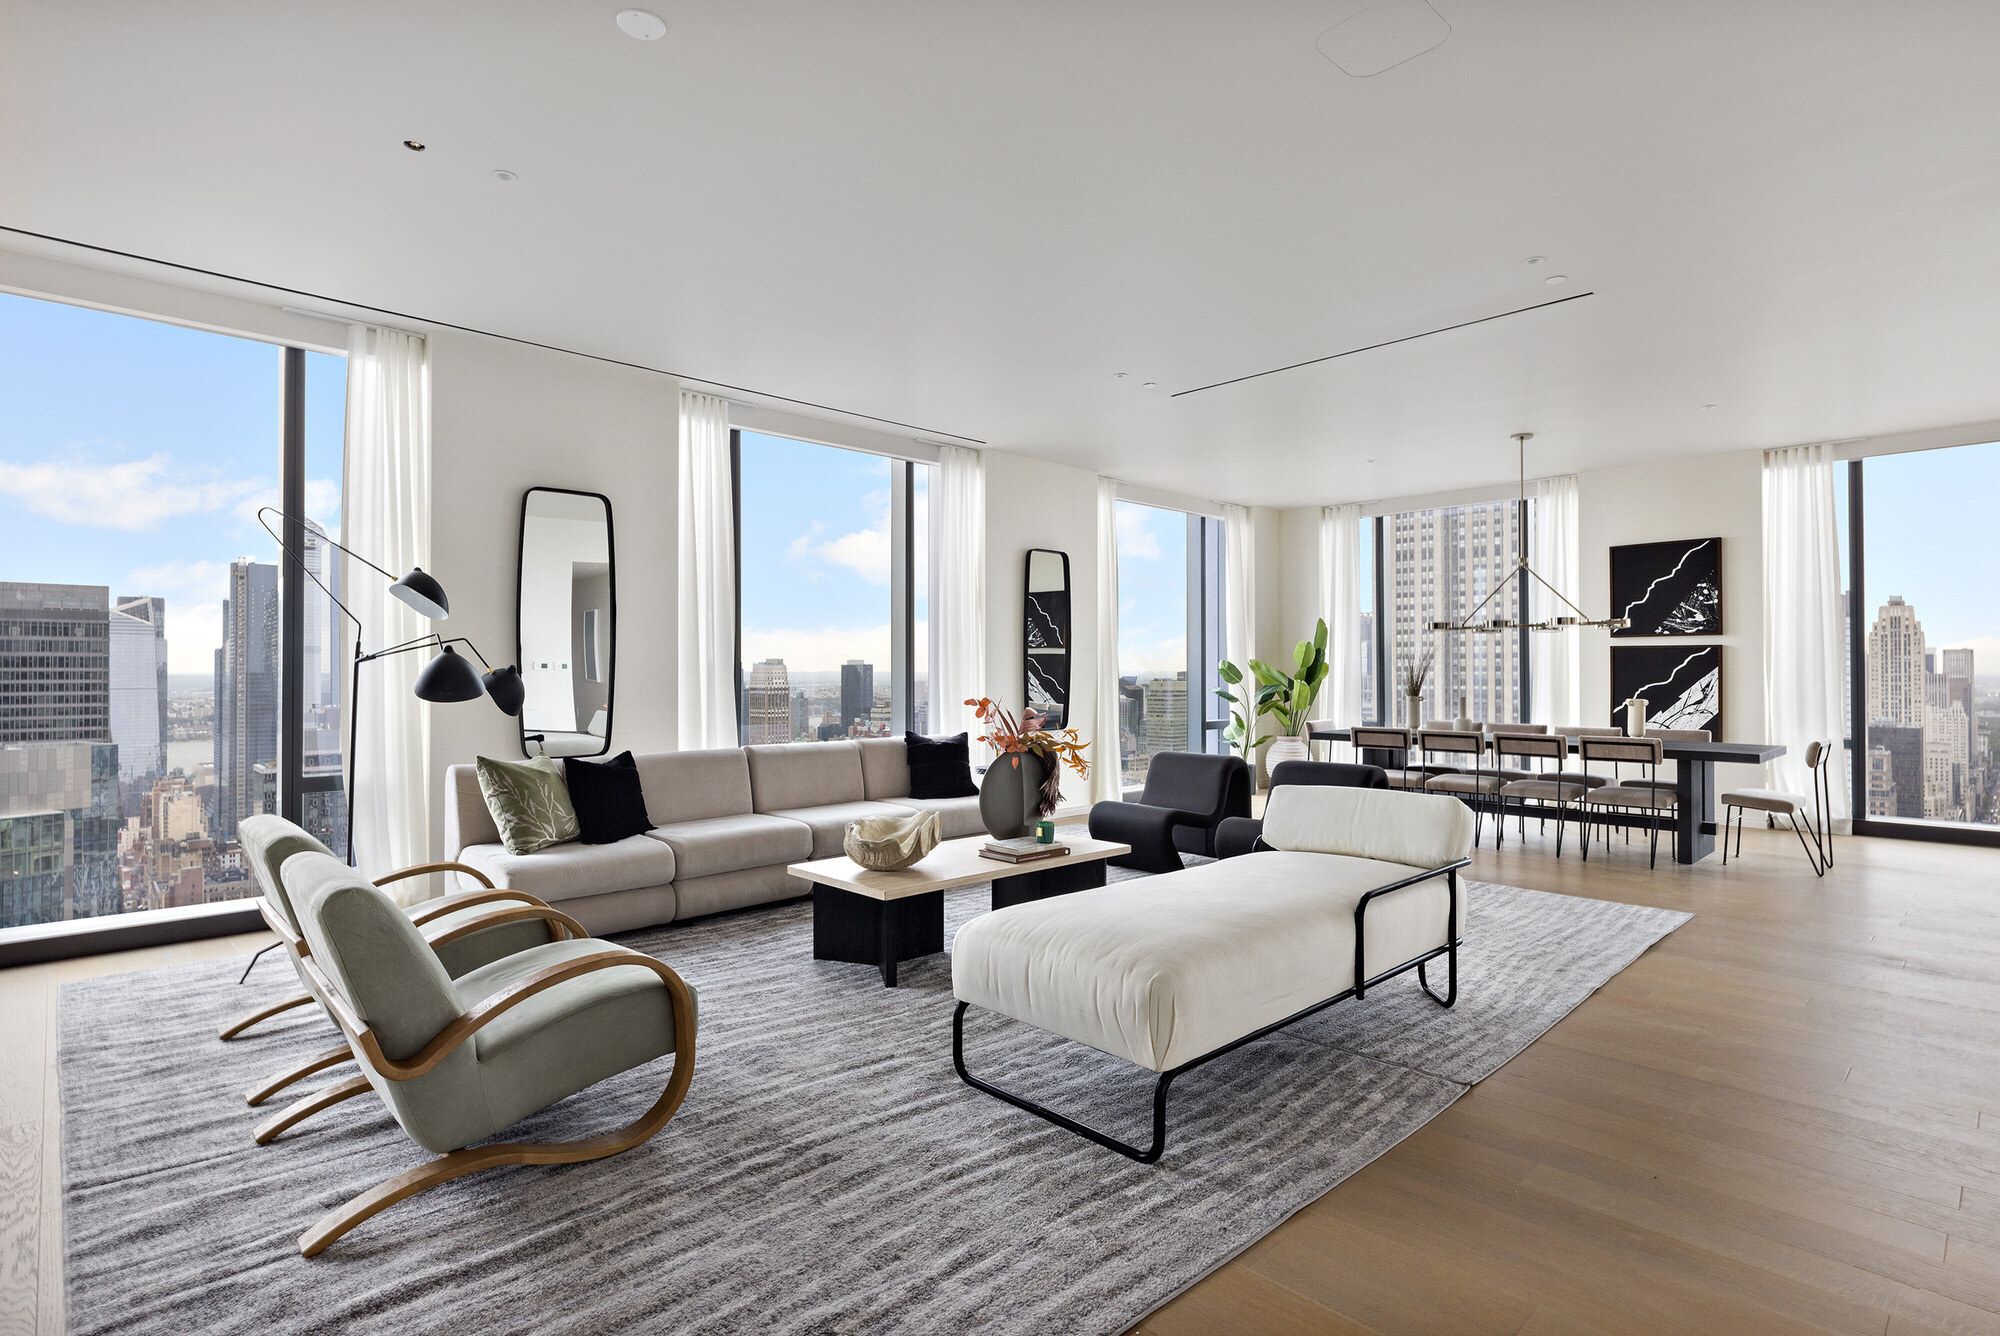 277 5th Ave Penthouse